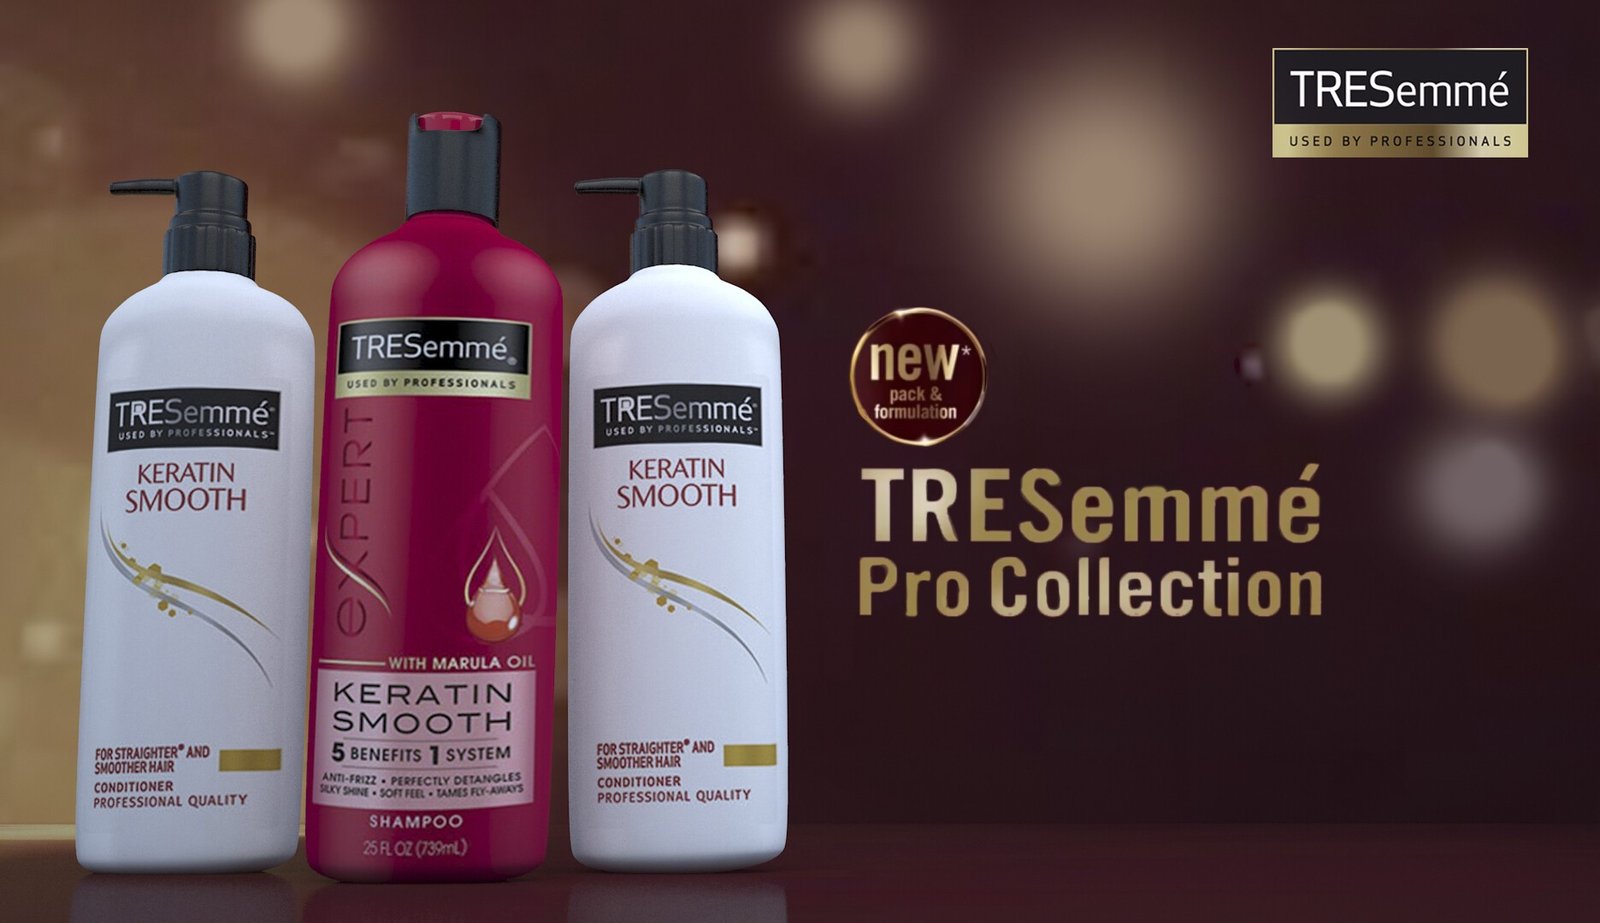 SWOT analysis of Tresemme